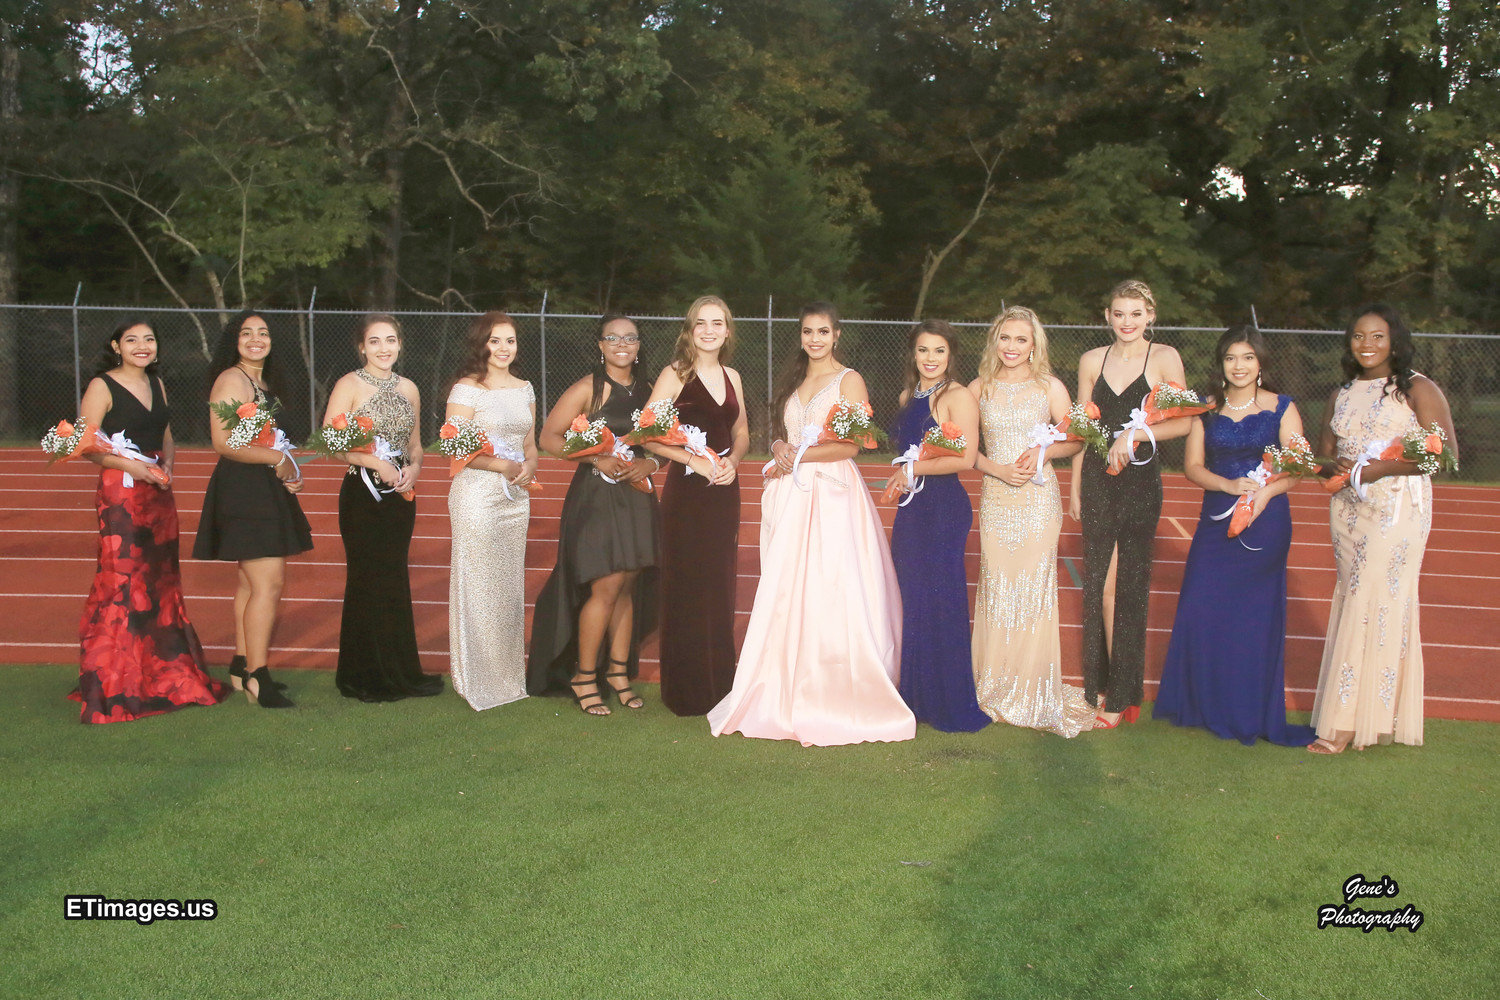 Mineola High School Homecoming Court. (Photo by Gene’s Photography/ETimages.us)